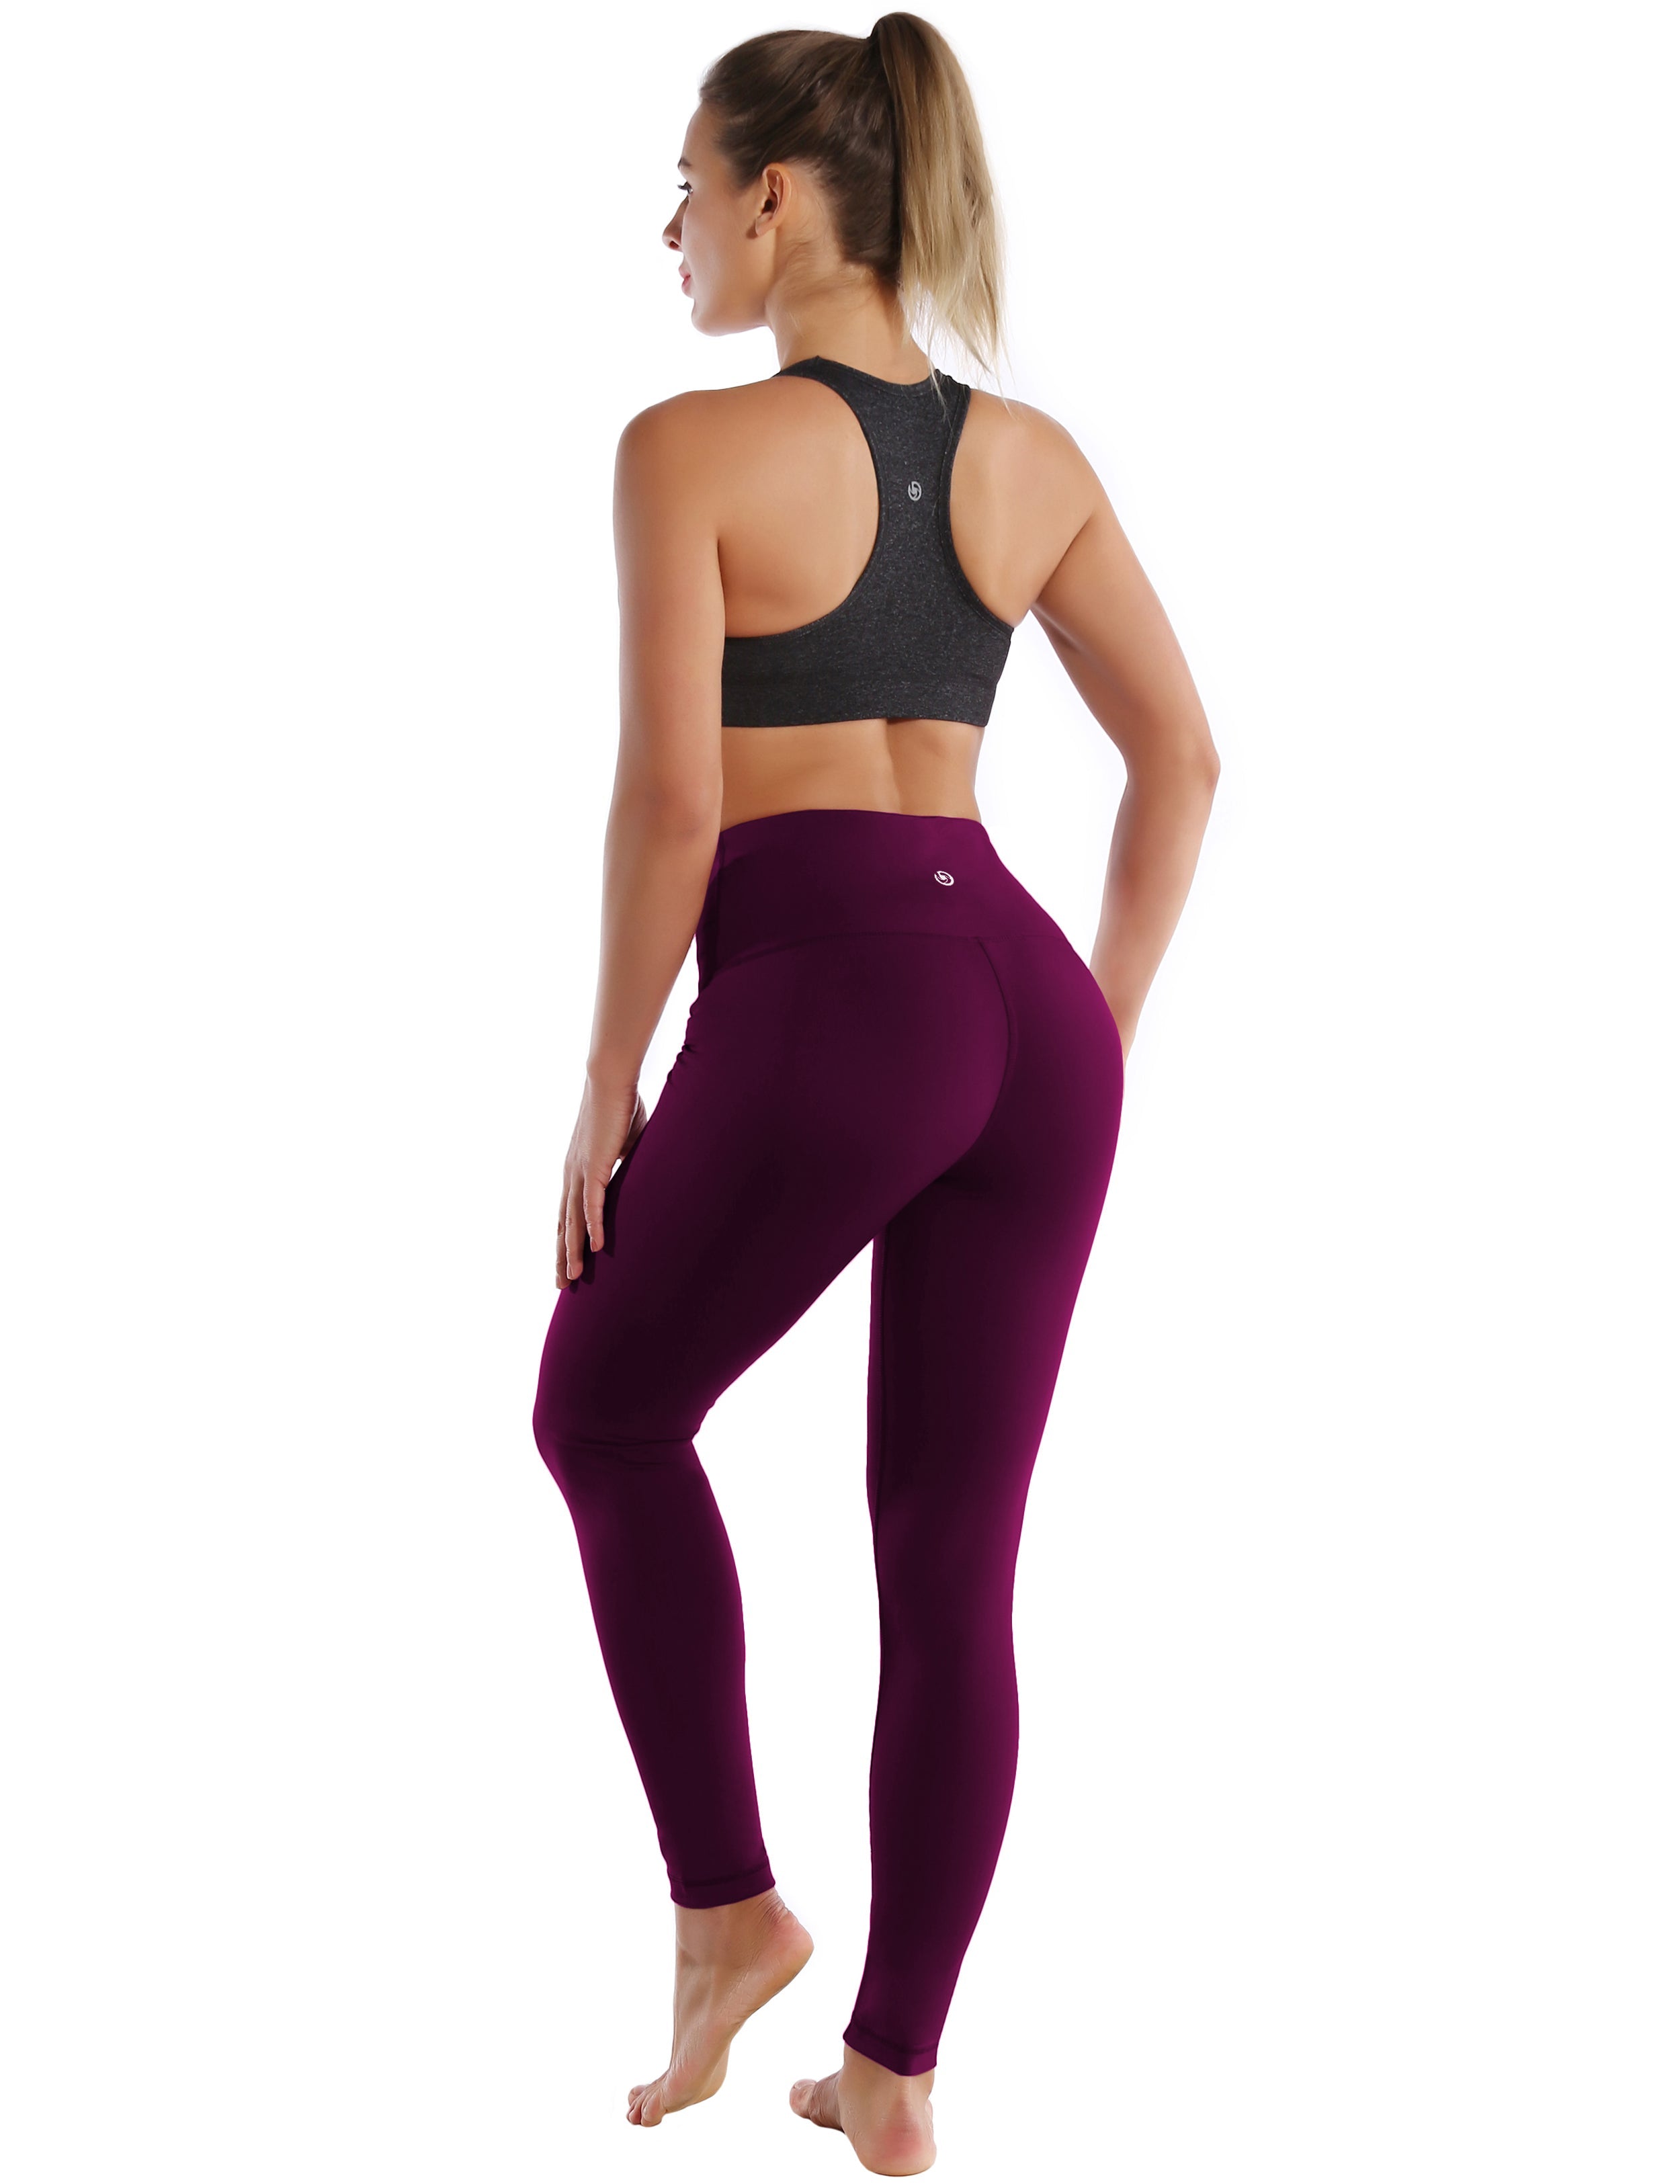 High Waist Running Pants grapevine 75%Nylon/25%Spandex Fabric doesn't attract lint easily 4-way stretch No see-through Moisture-wicking Tummy control Inner pocket Four lengths